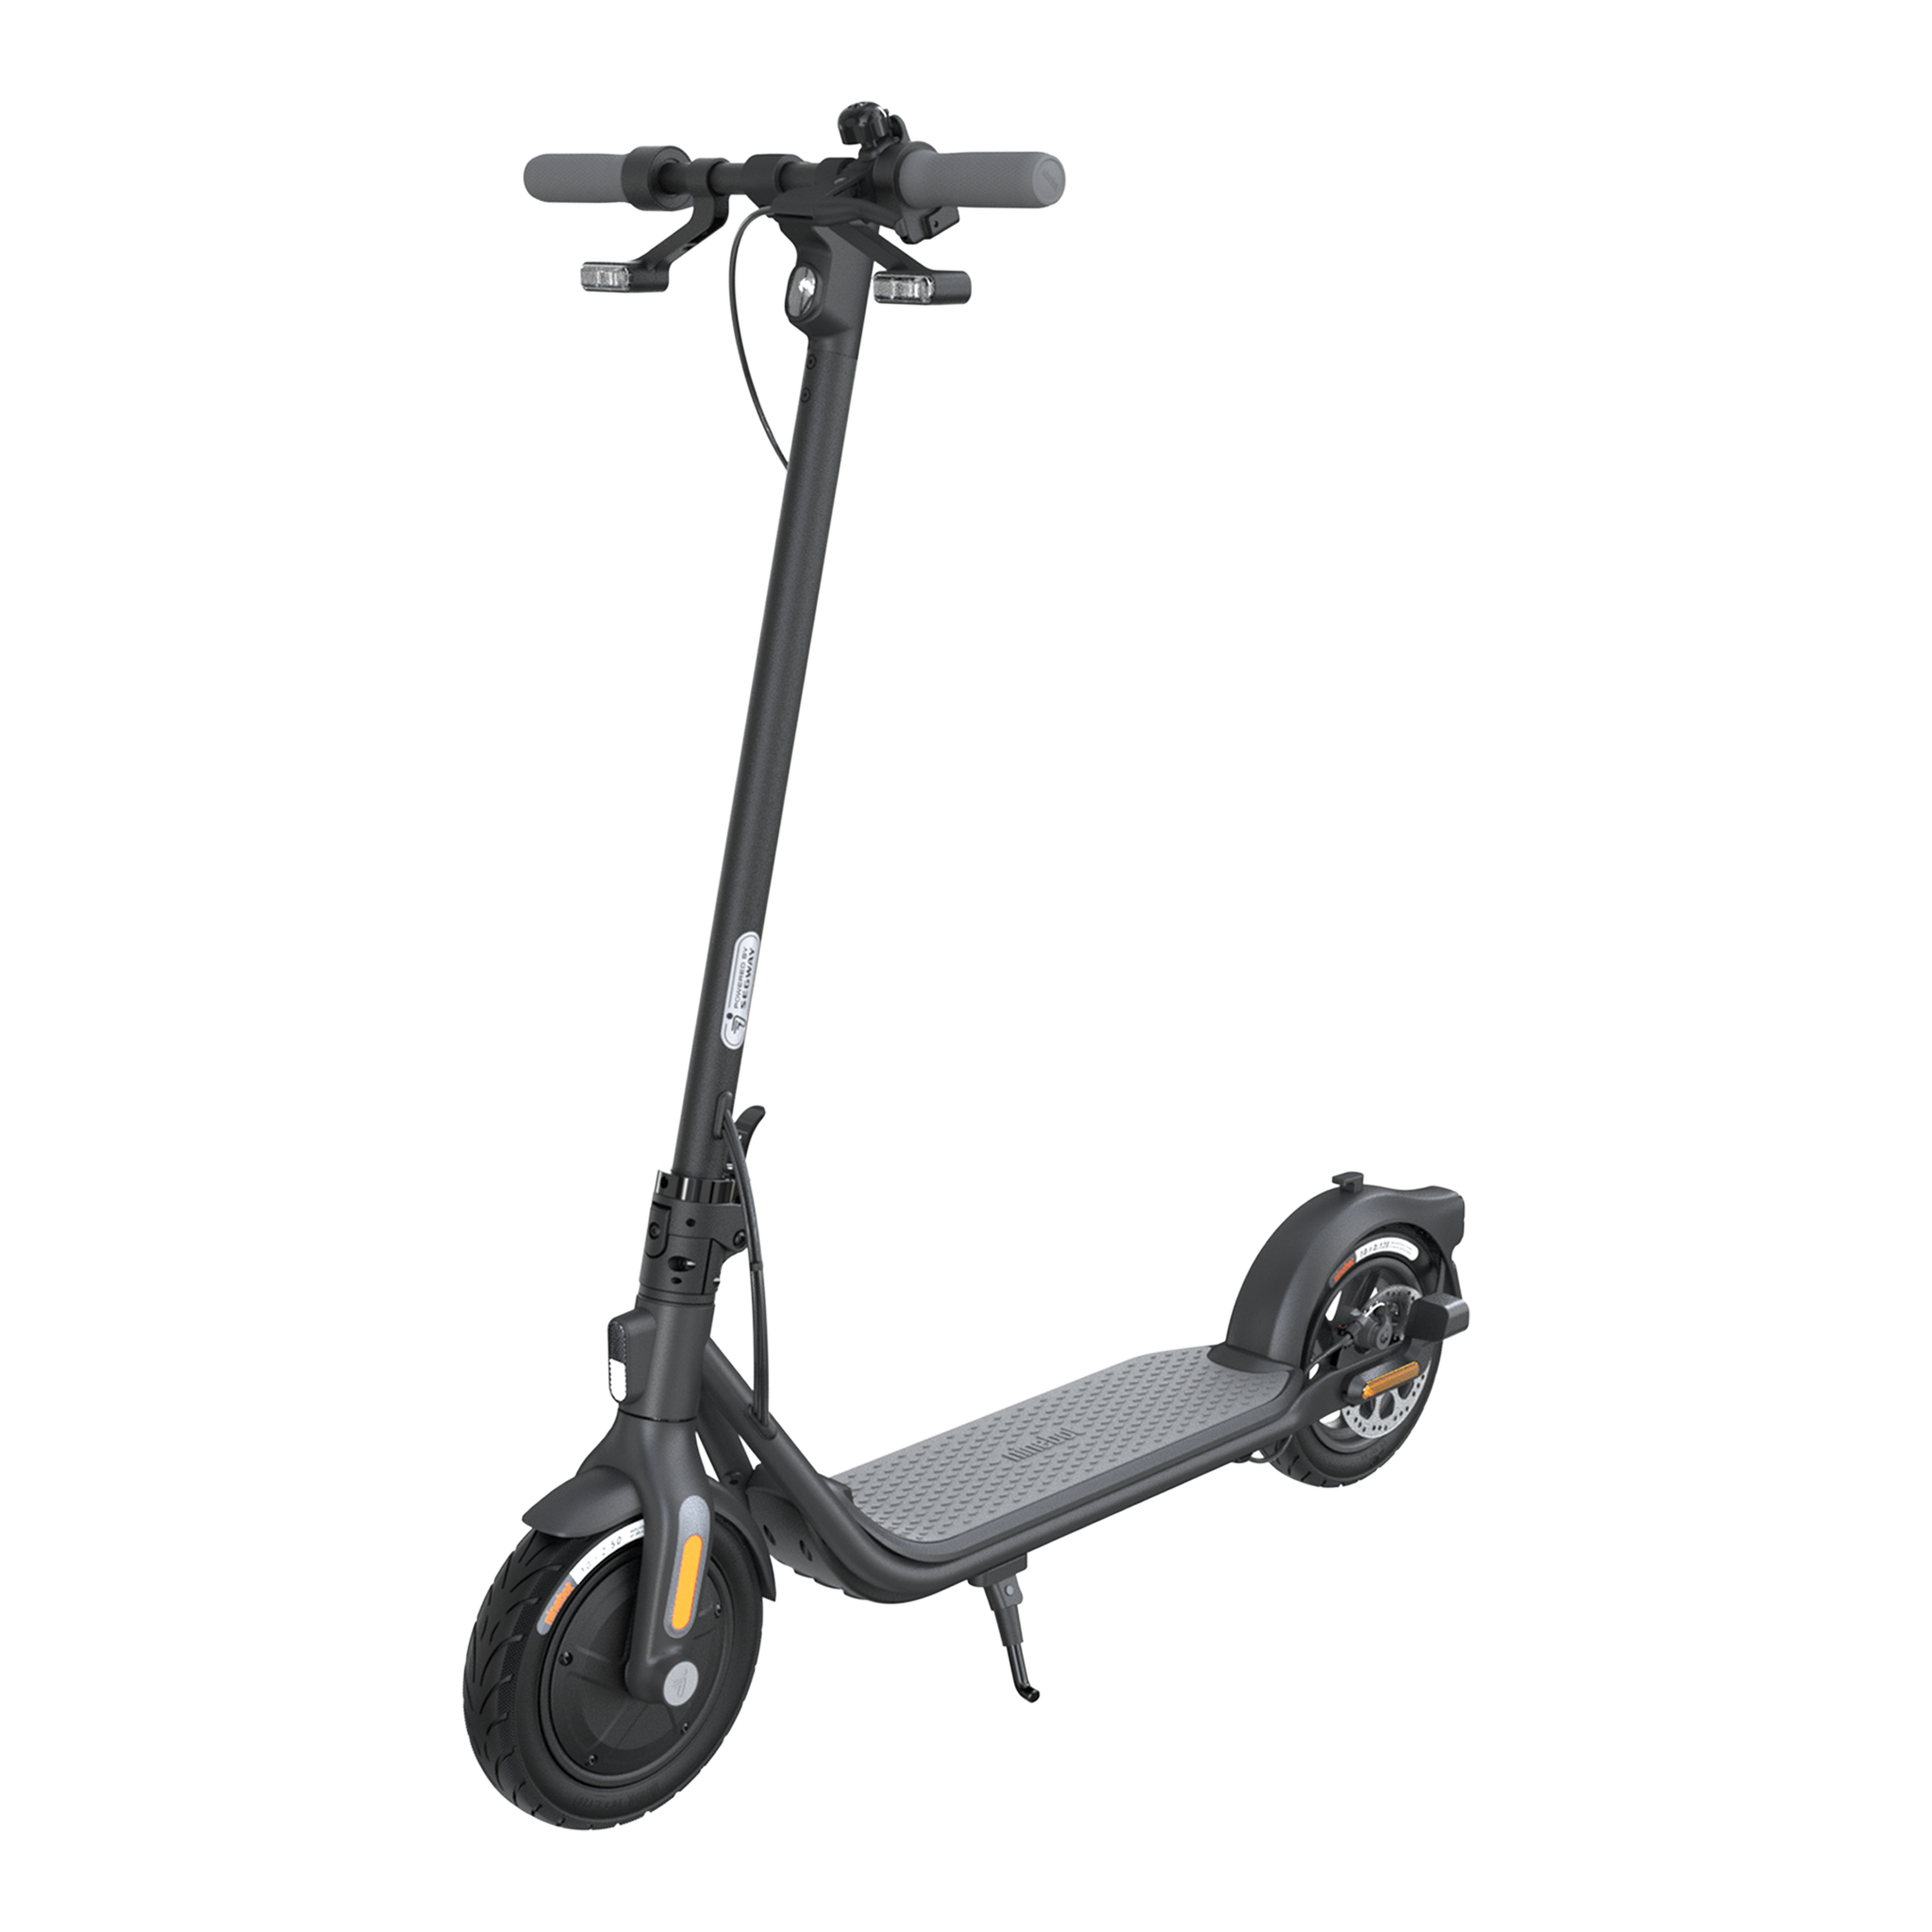 Ninebot-KickScooter-phone-holder-Product-picture.png